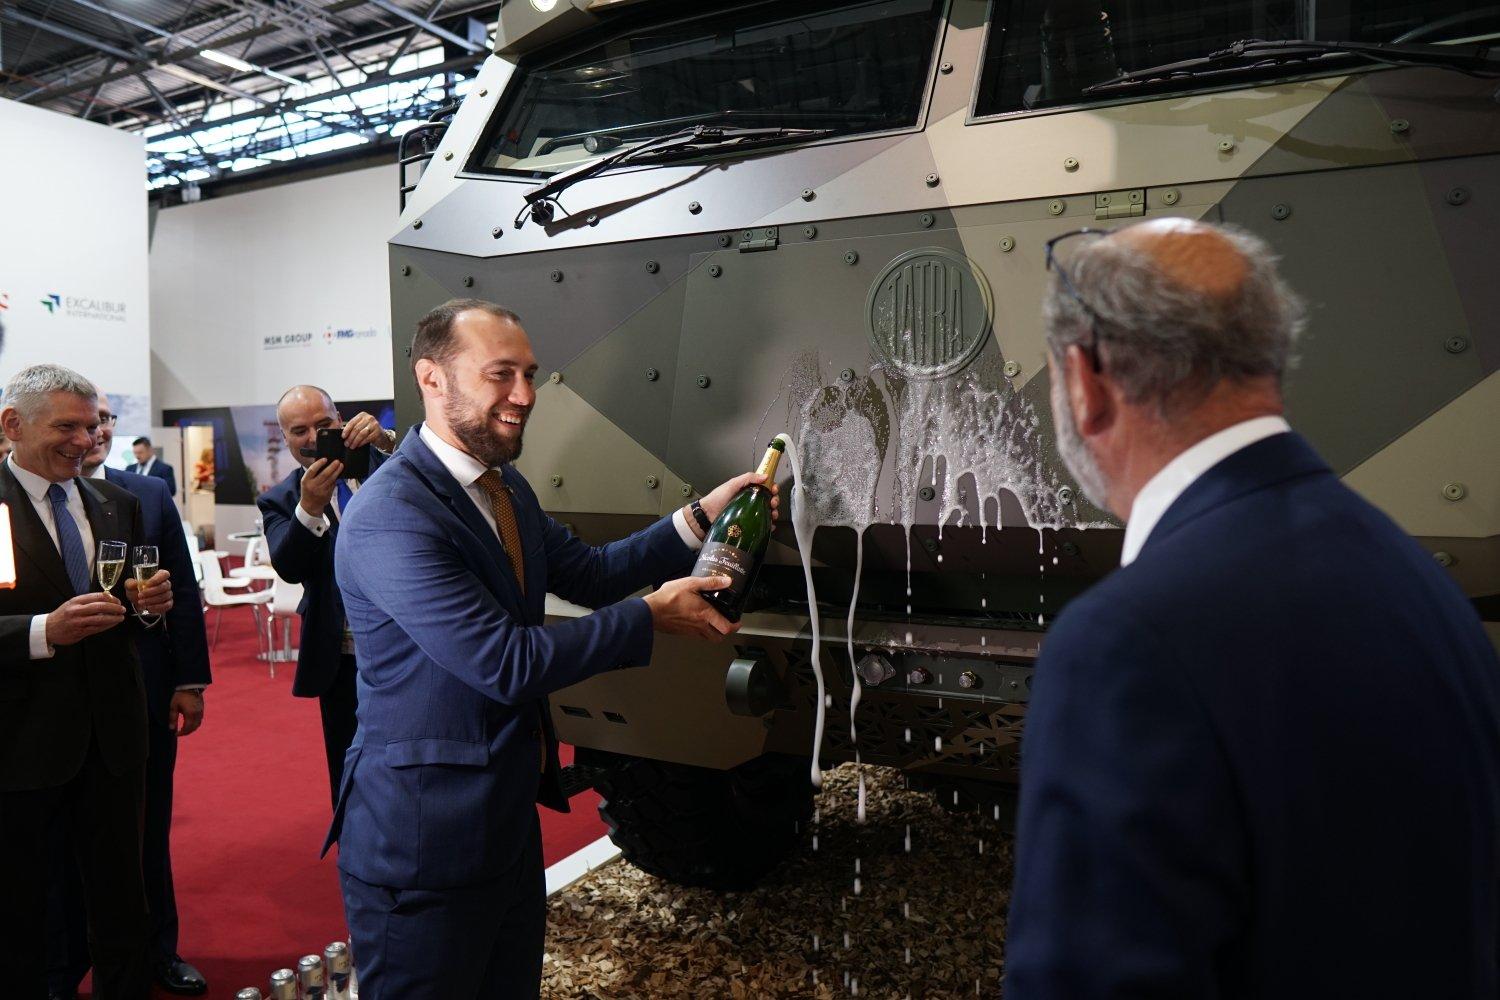 Excalibur Army and Tatra Trucks Introduces Morana Howitzer Technology Demonstrator